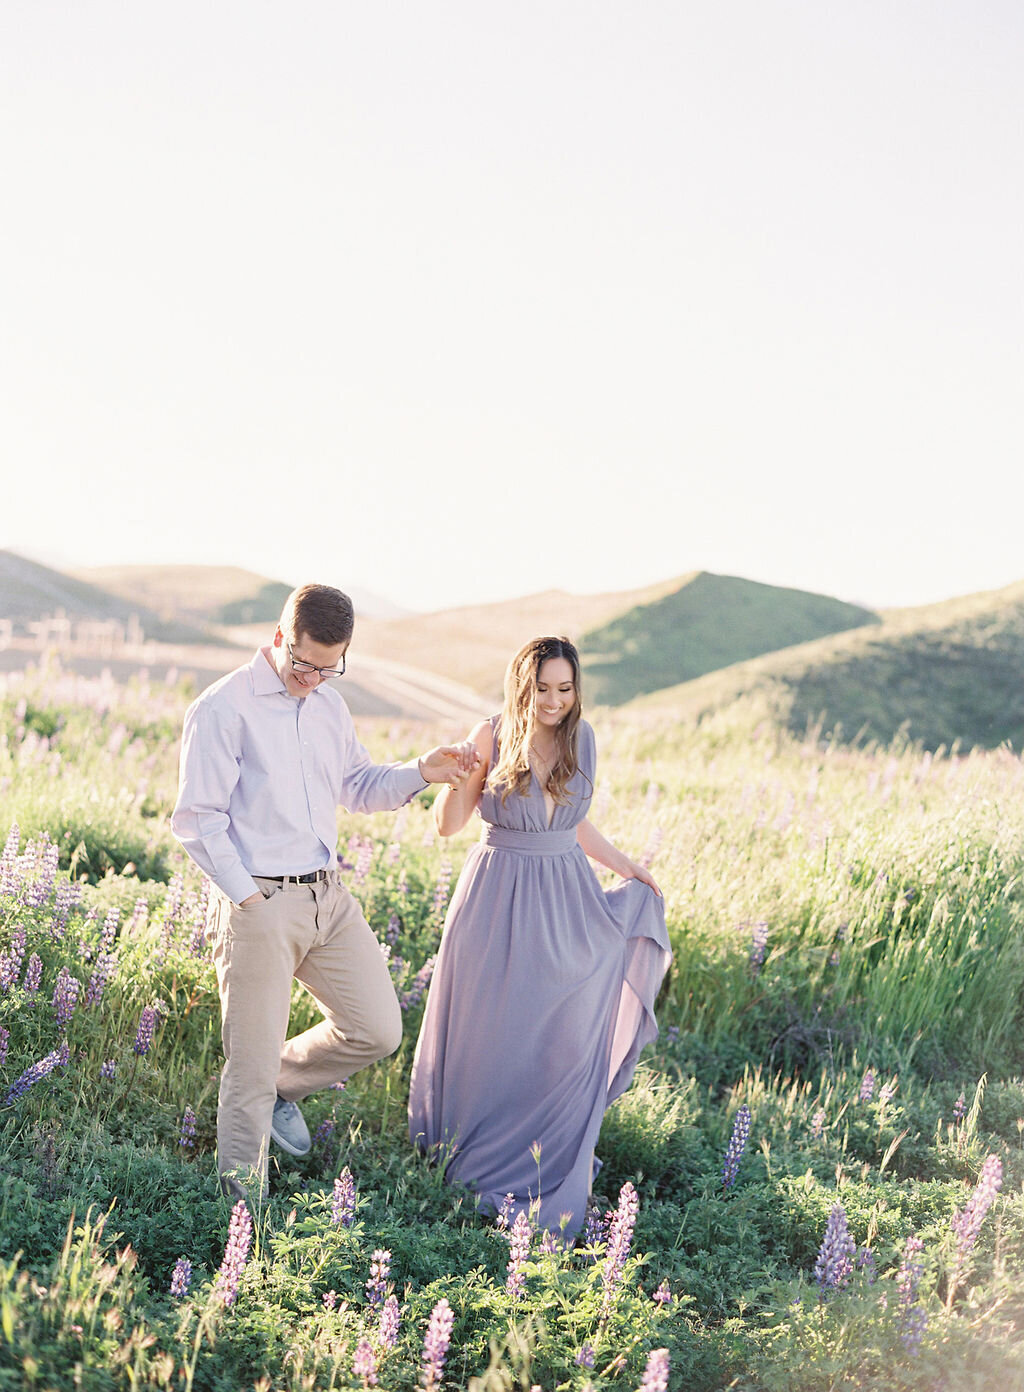 Danielle_Bacon_Photography_ Spring_Engagement_Session13